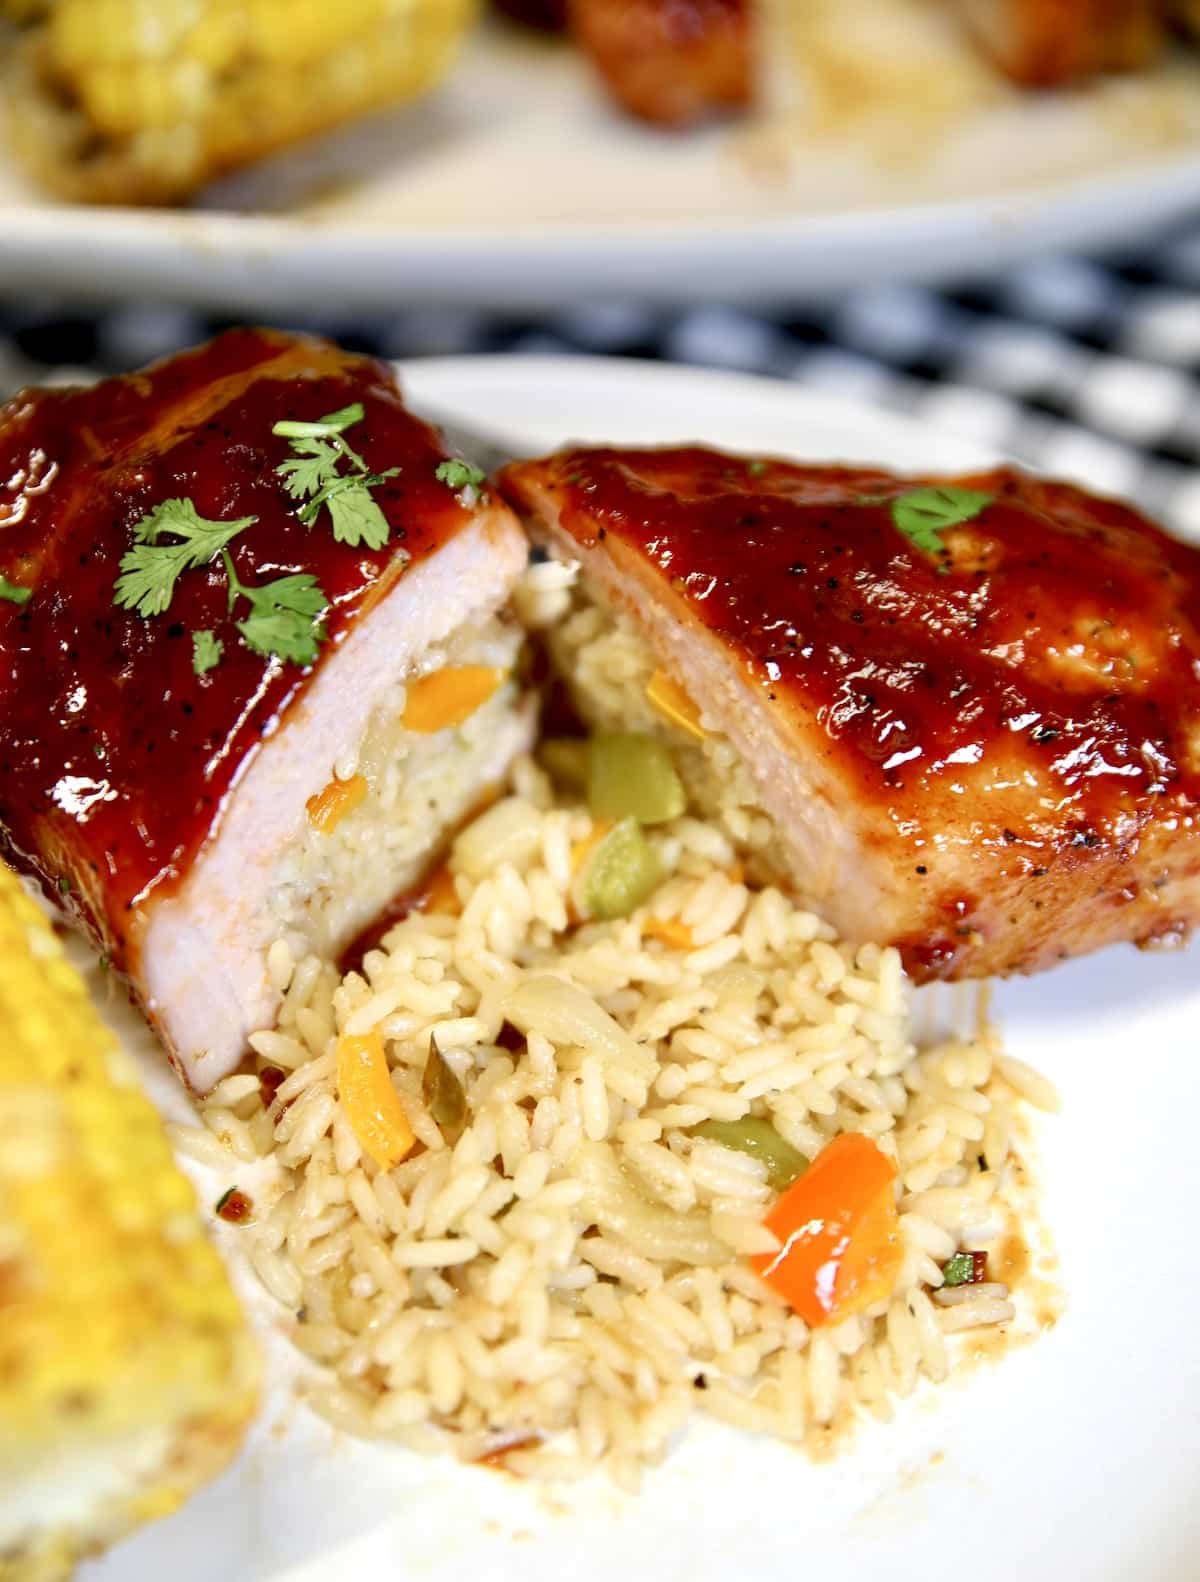 Pork chop with rice pilaf and corn on a plate.